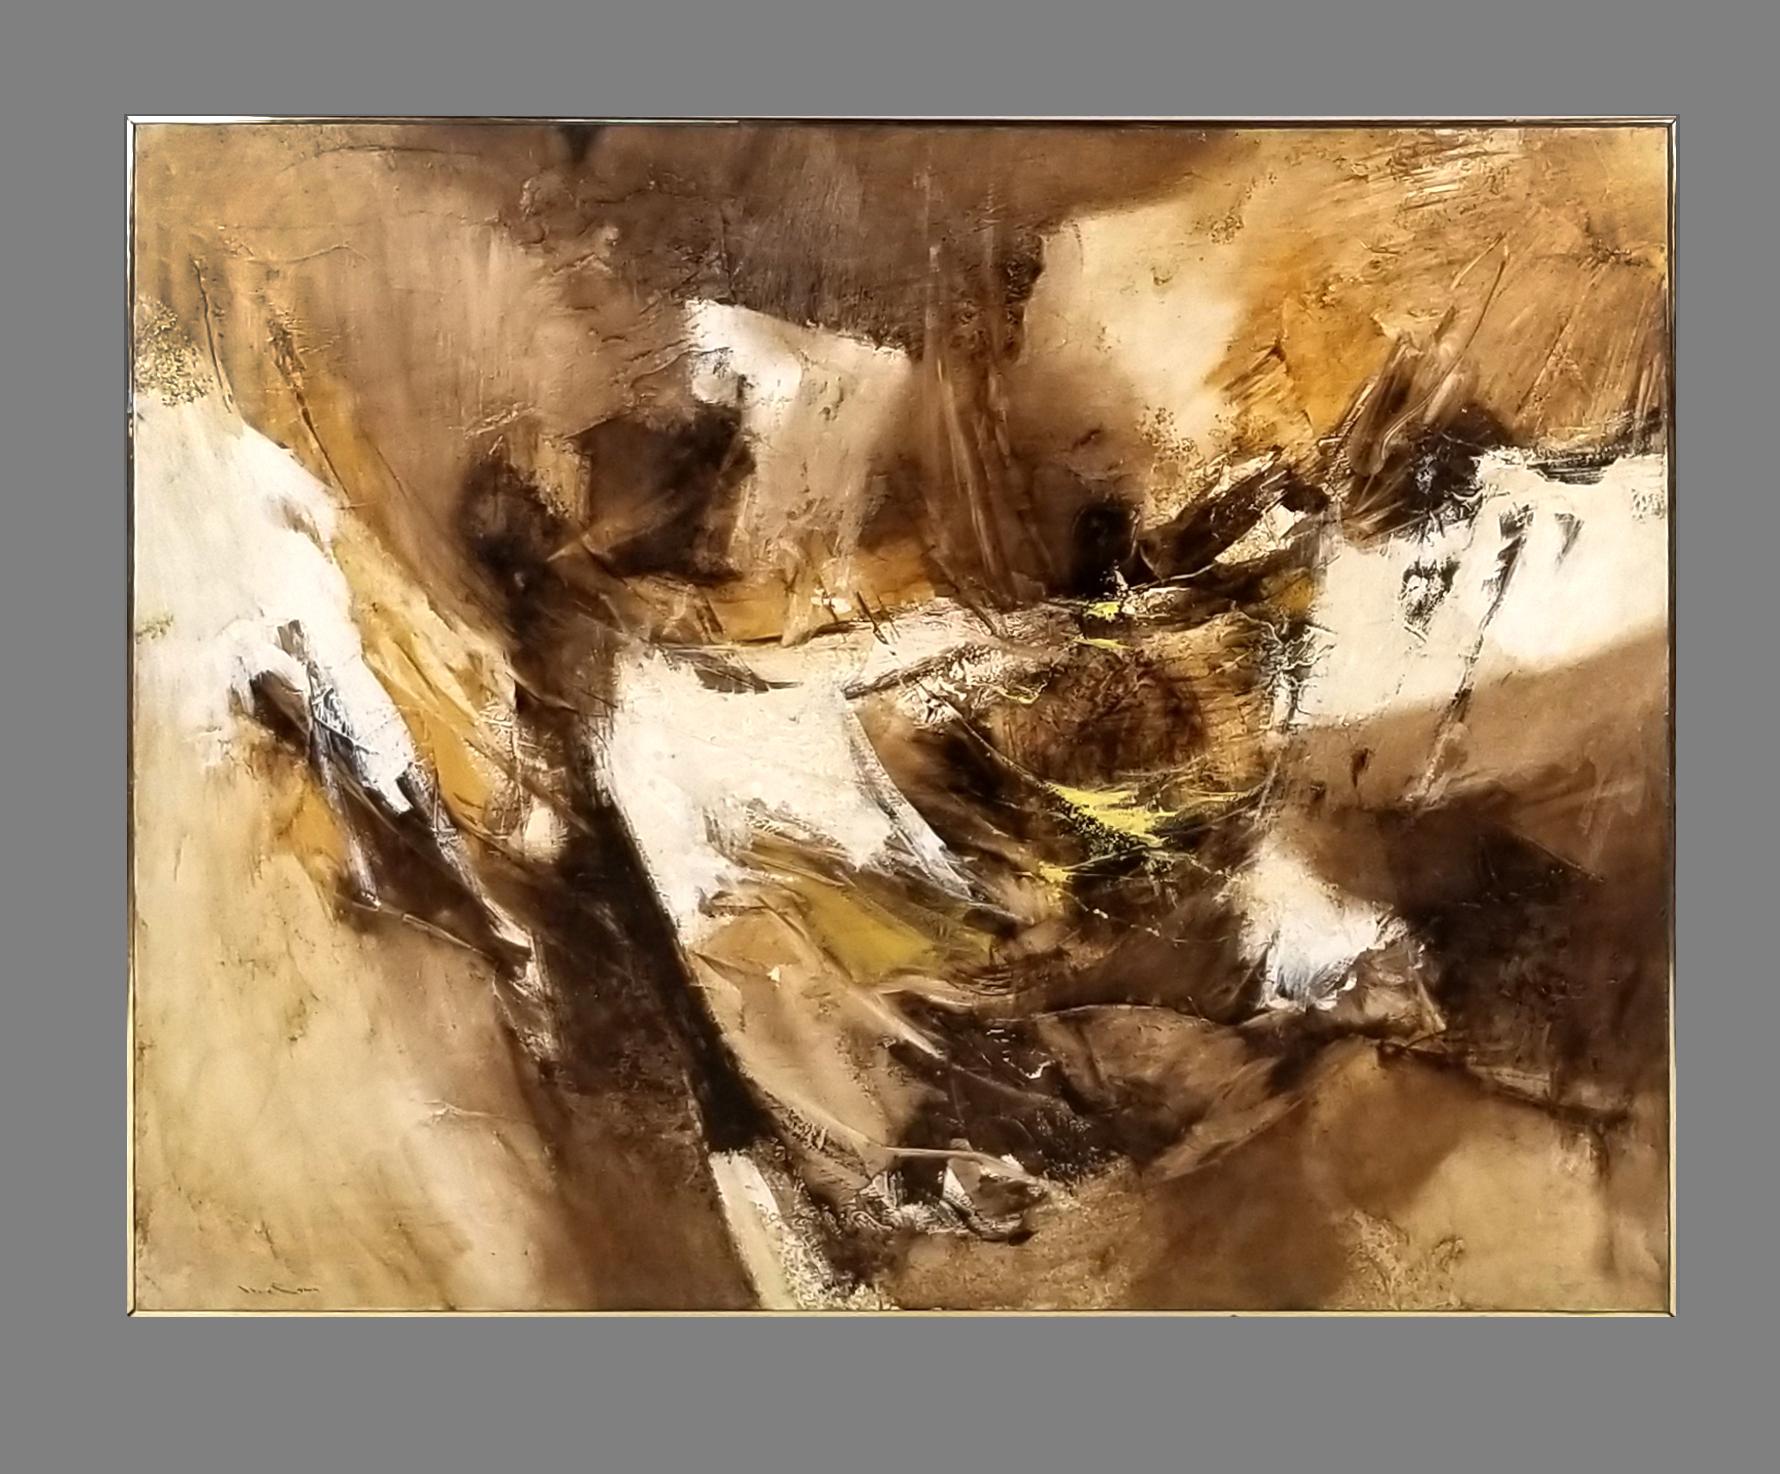 Abstract oil and encaustic on board by Walter McCown executed in the mid-1960s. From the corporate collection of a private Texas bank.

Walter Edwin McCown is a listed Texas artist who was born in Whitney, Texas. He lived for times in McAllen,